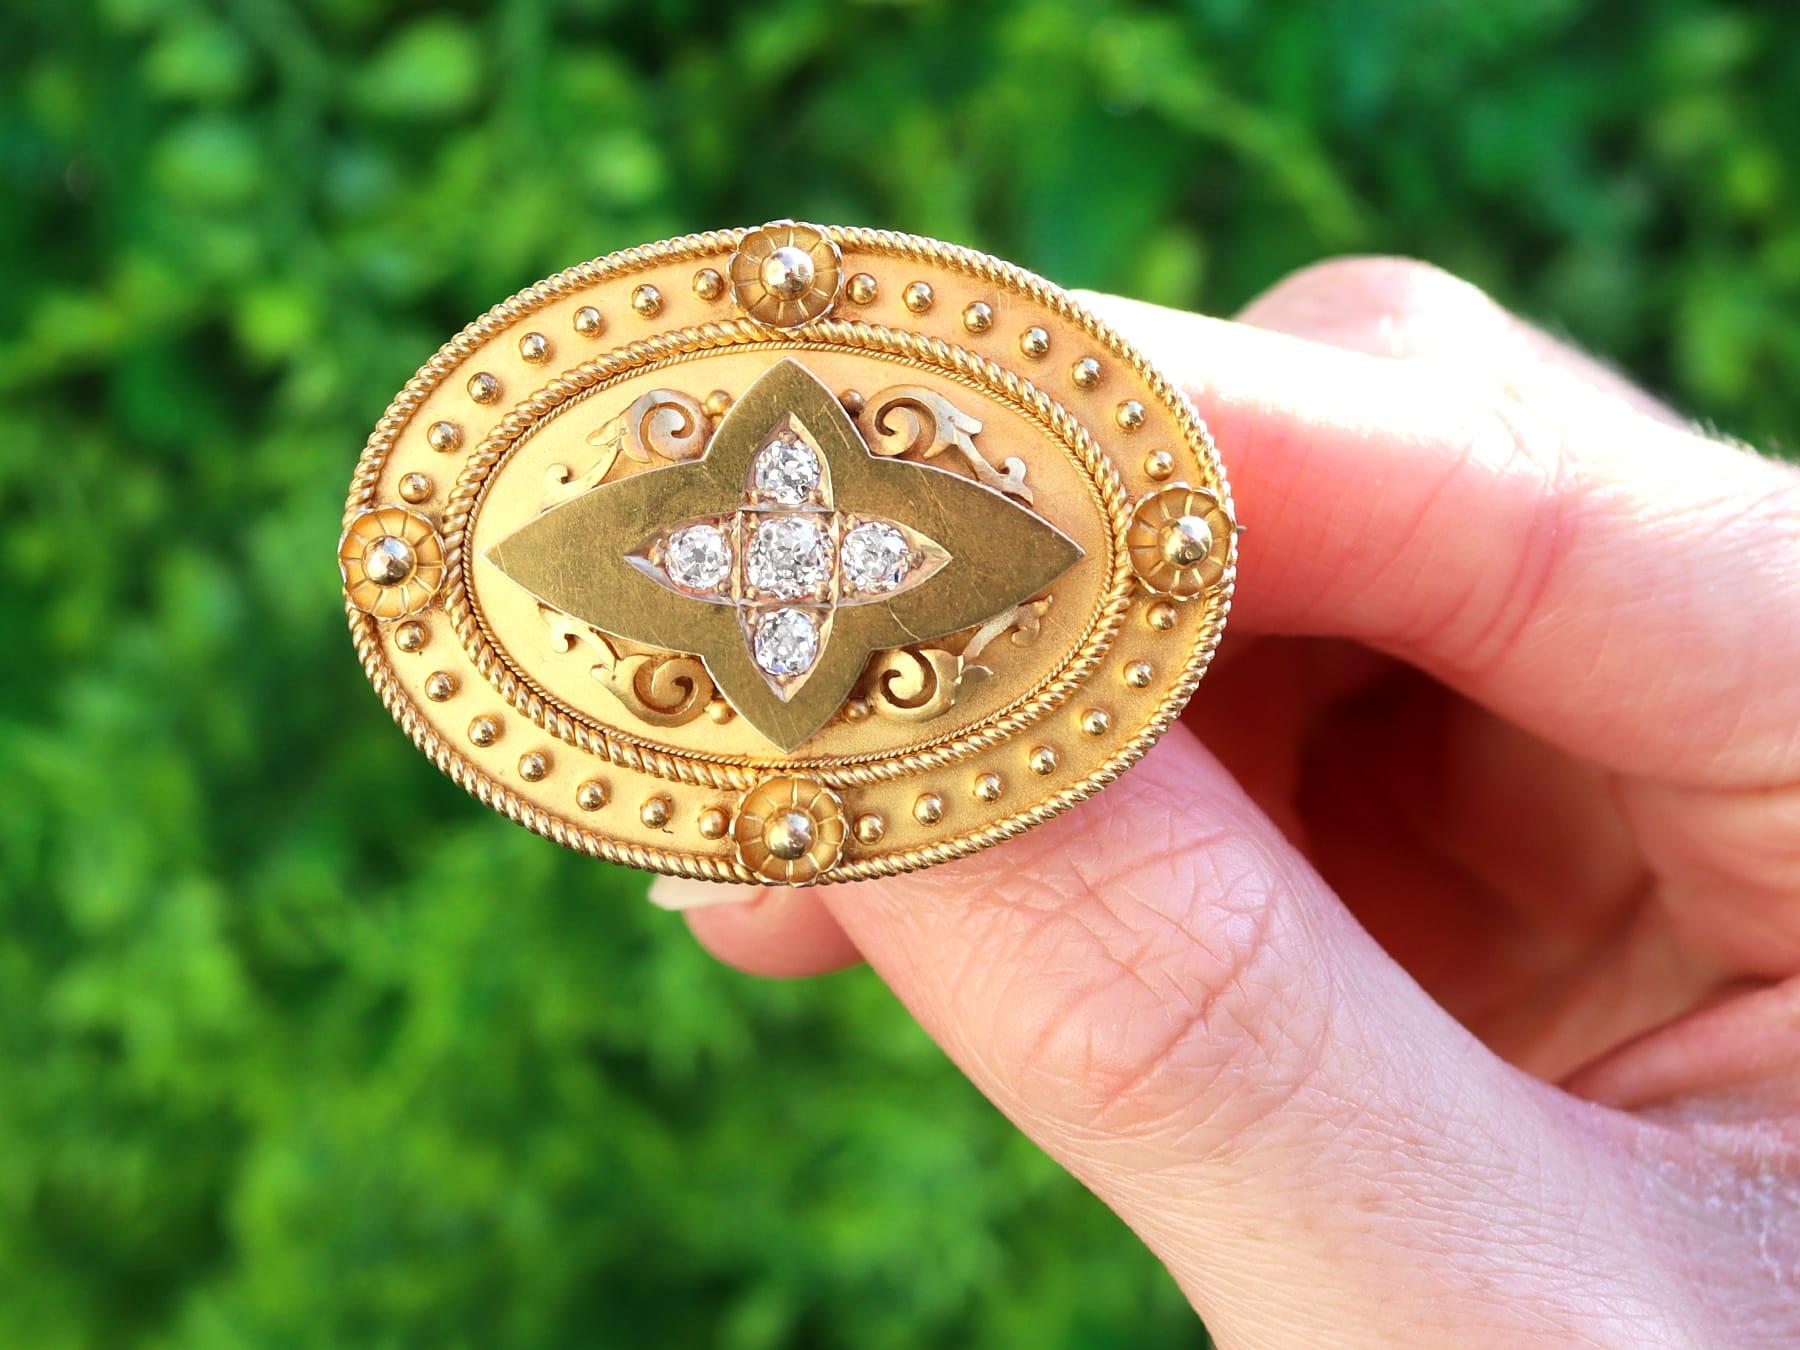 A very fine and impressive antique Victorian 0.88Ct old European round cut diamond and 15 karat yellow gold brooch/locket; part of our antique jewelry and estate jewelry collections.

This fine antique Victorian brooch / locket has been crafted in